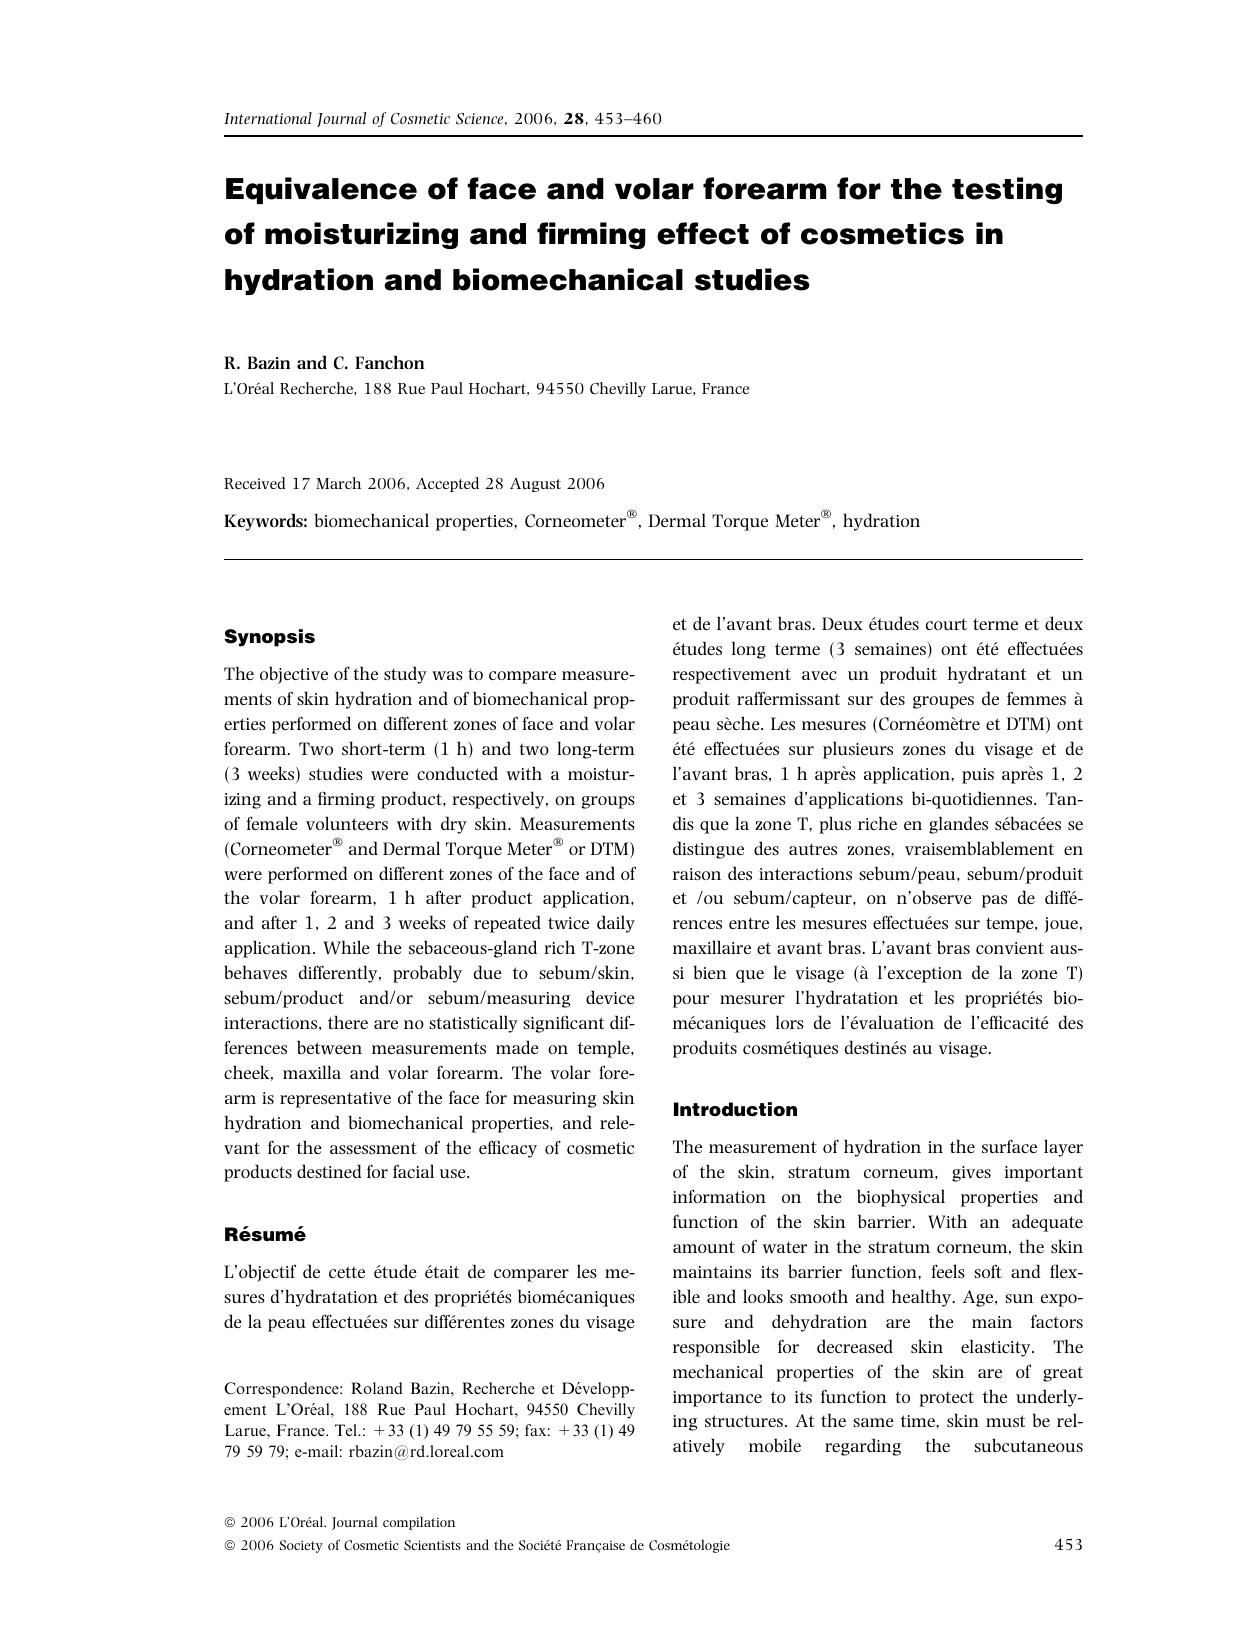 Equivalence of face and volar forearm for the testing of moisturizing and firming effect of cosmetics in hydration and biomechanical studies by Unknown